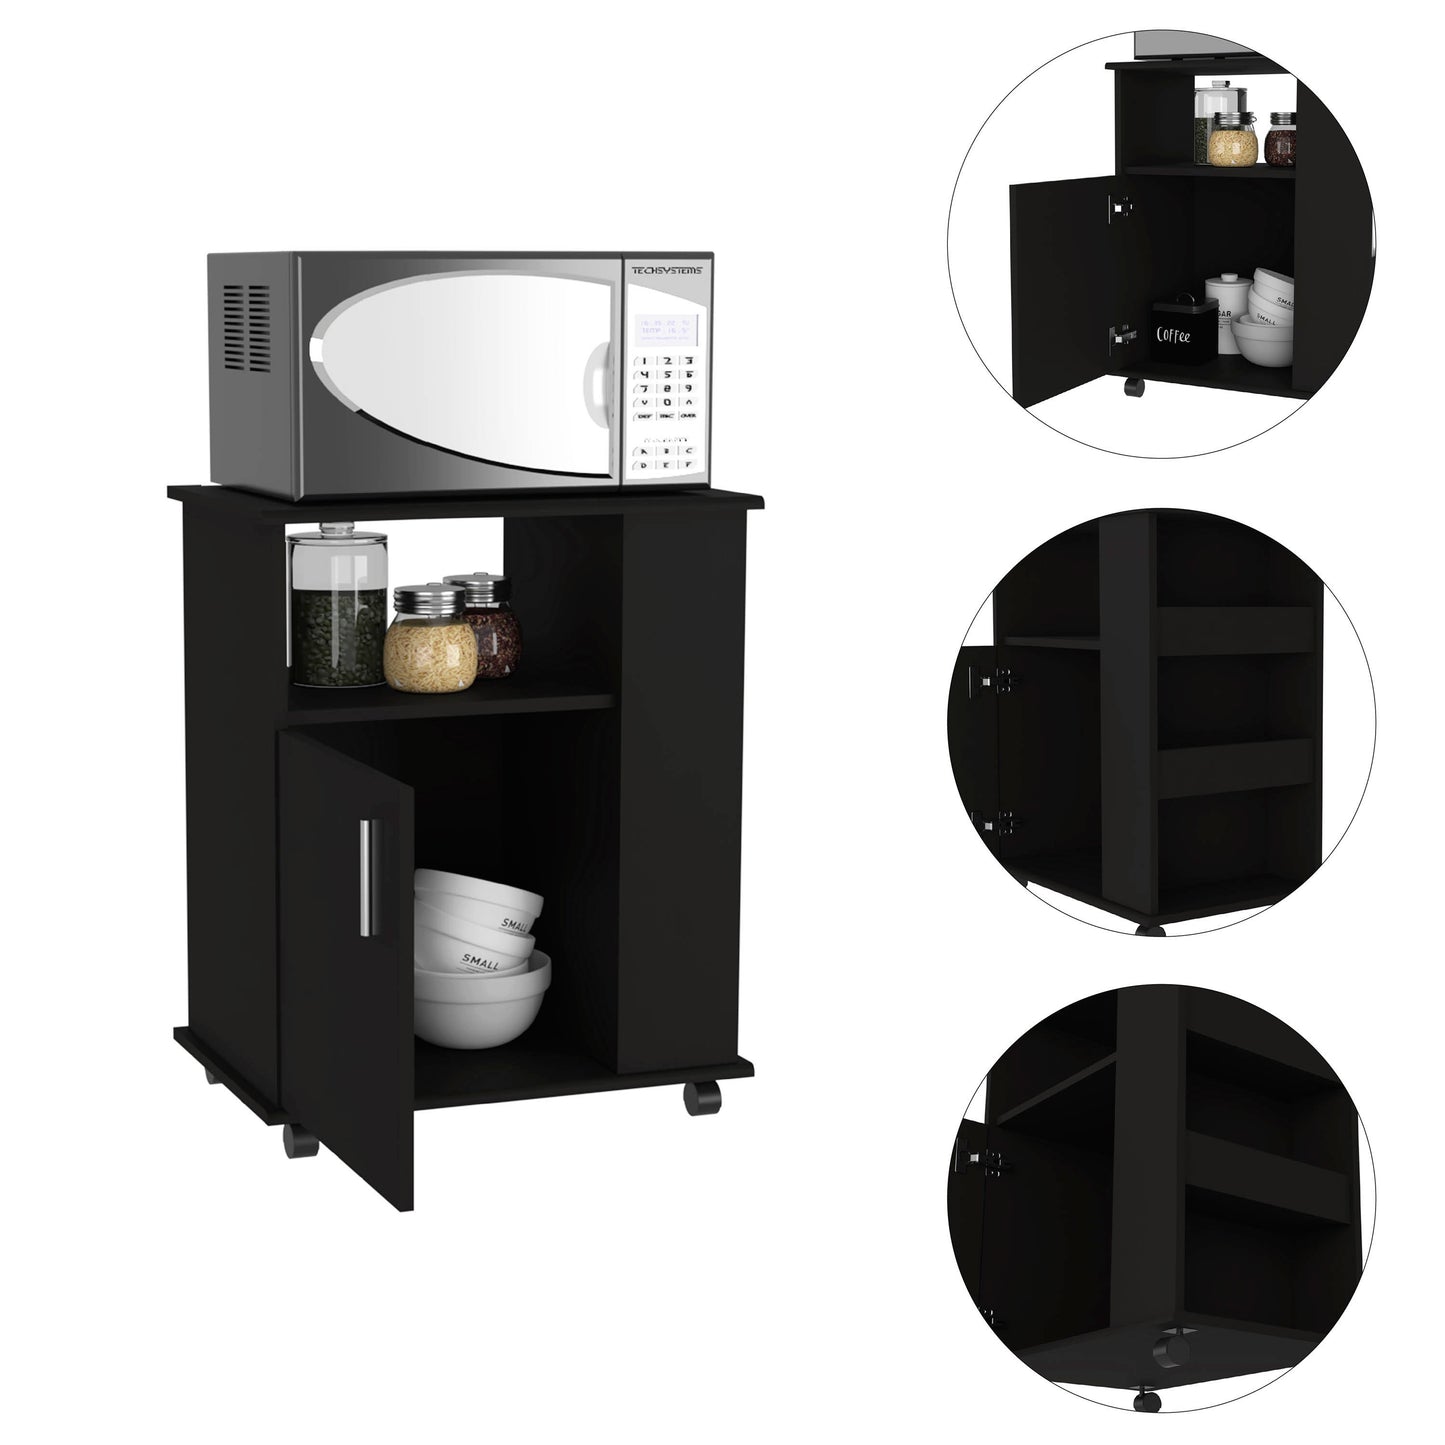 Correy 4-Shelf Microwave Cabinet with Caster - Black